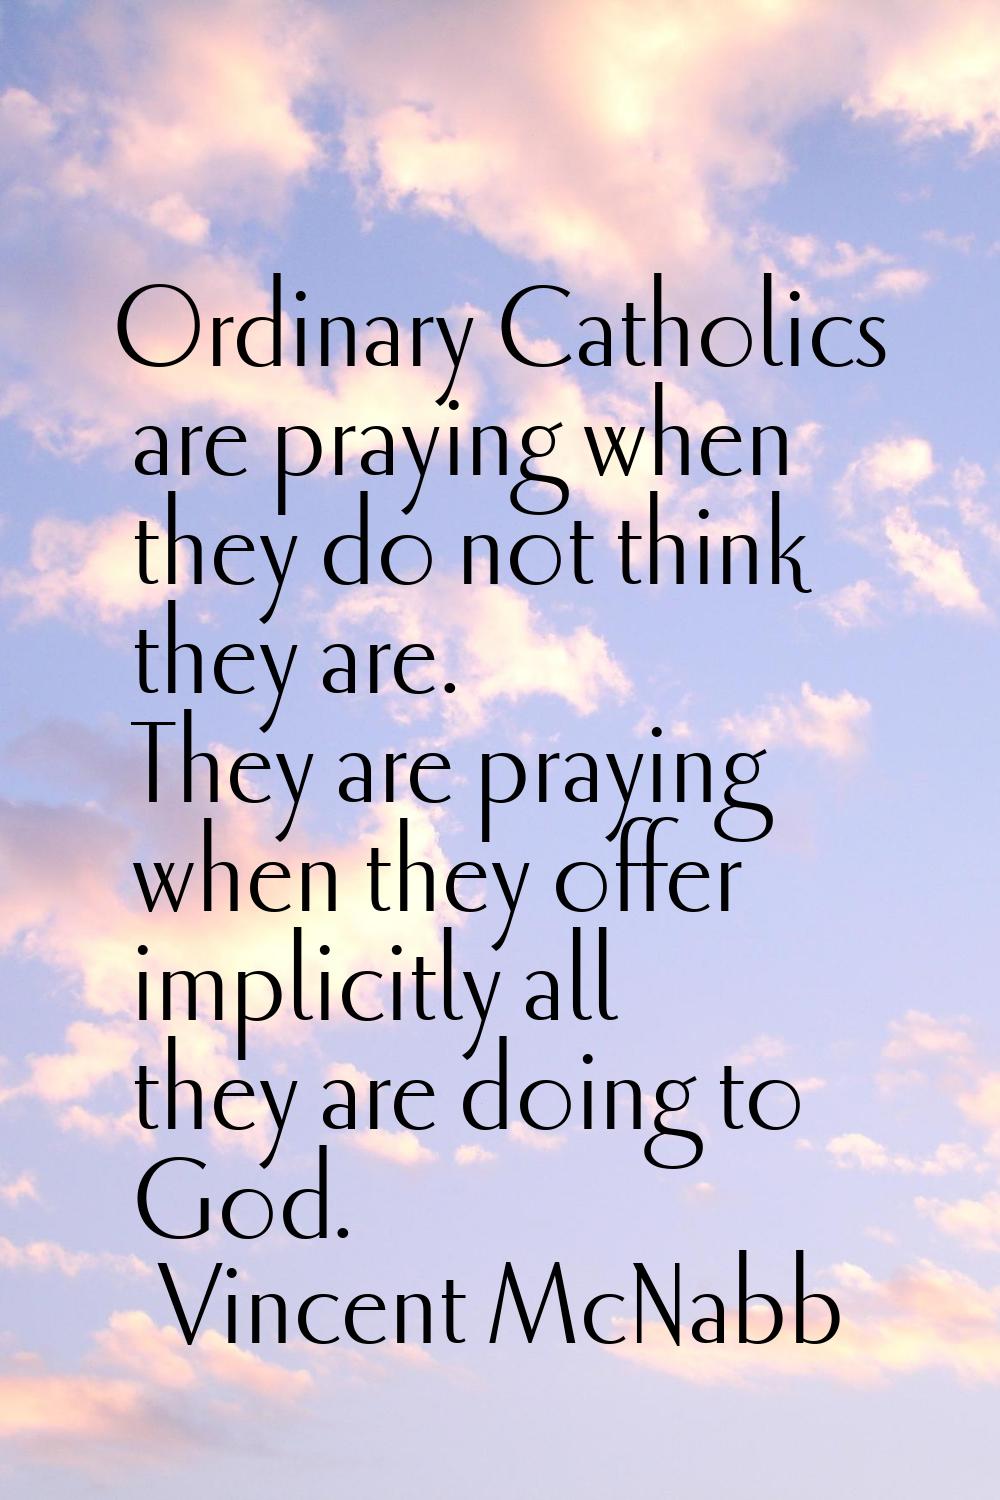 Ordinary Catholics are praying when they do not think they are. They are praying when they offer im